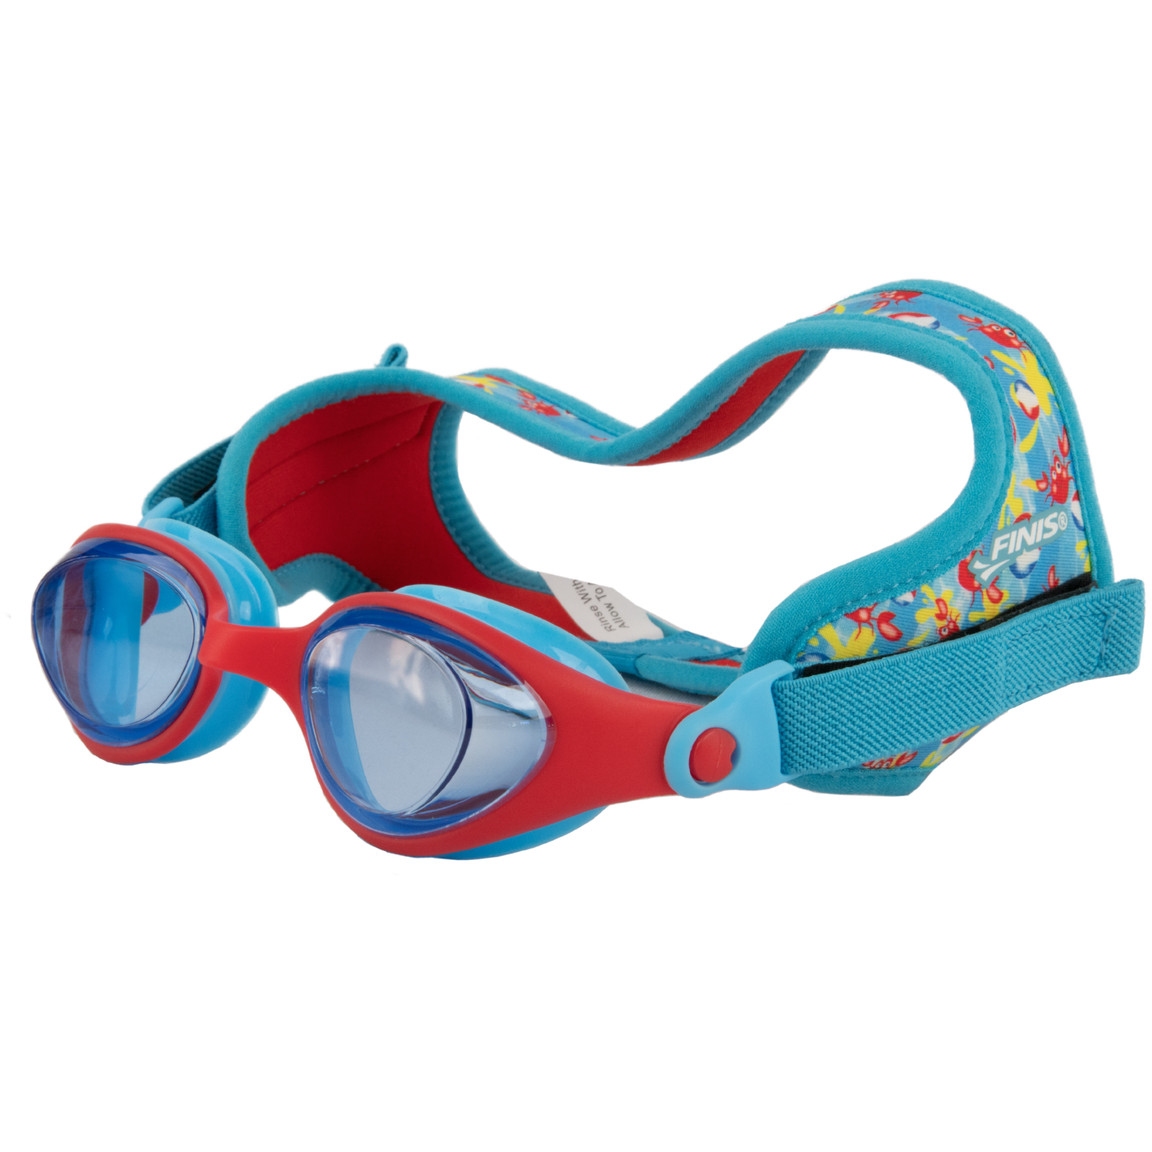 Image of FINIS, Inc. DragonFlys Kids' Goggles - crab tint